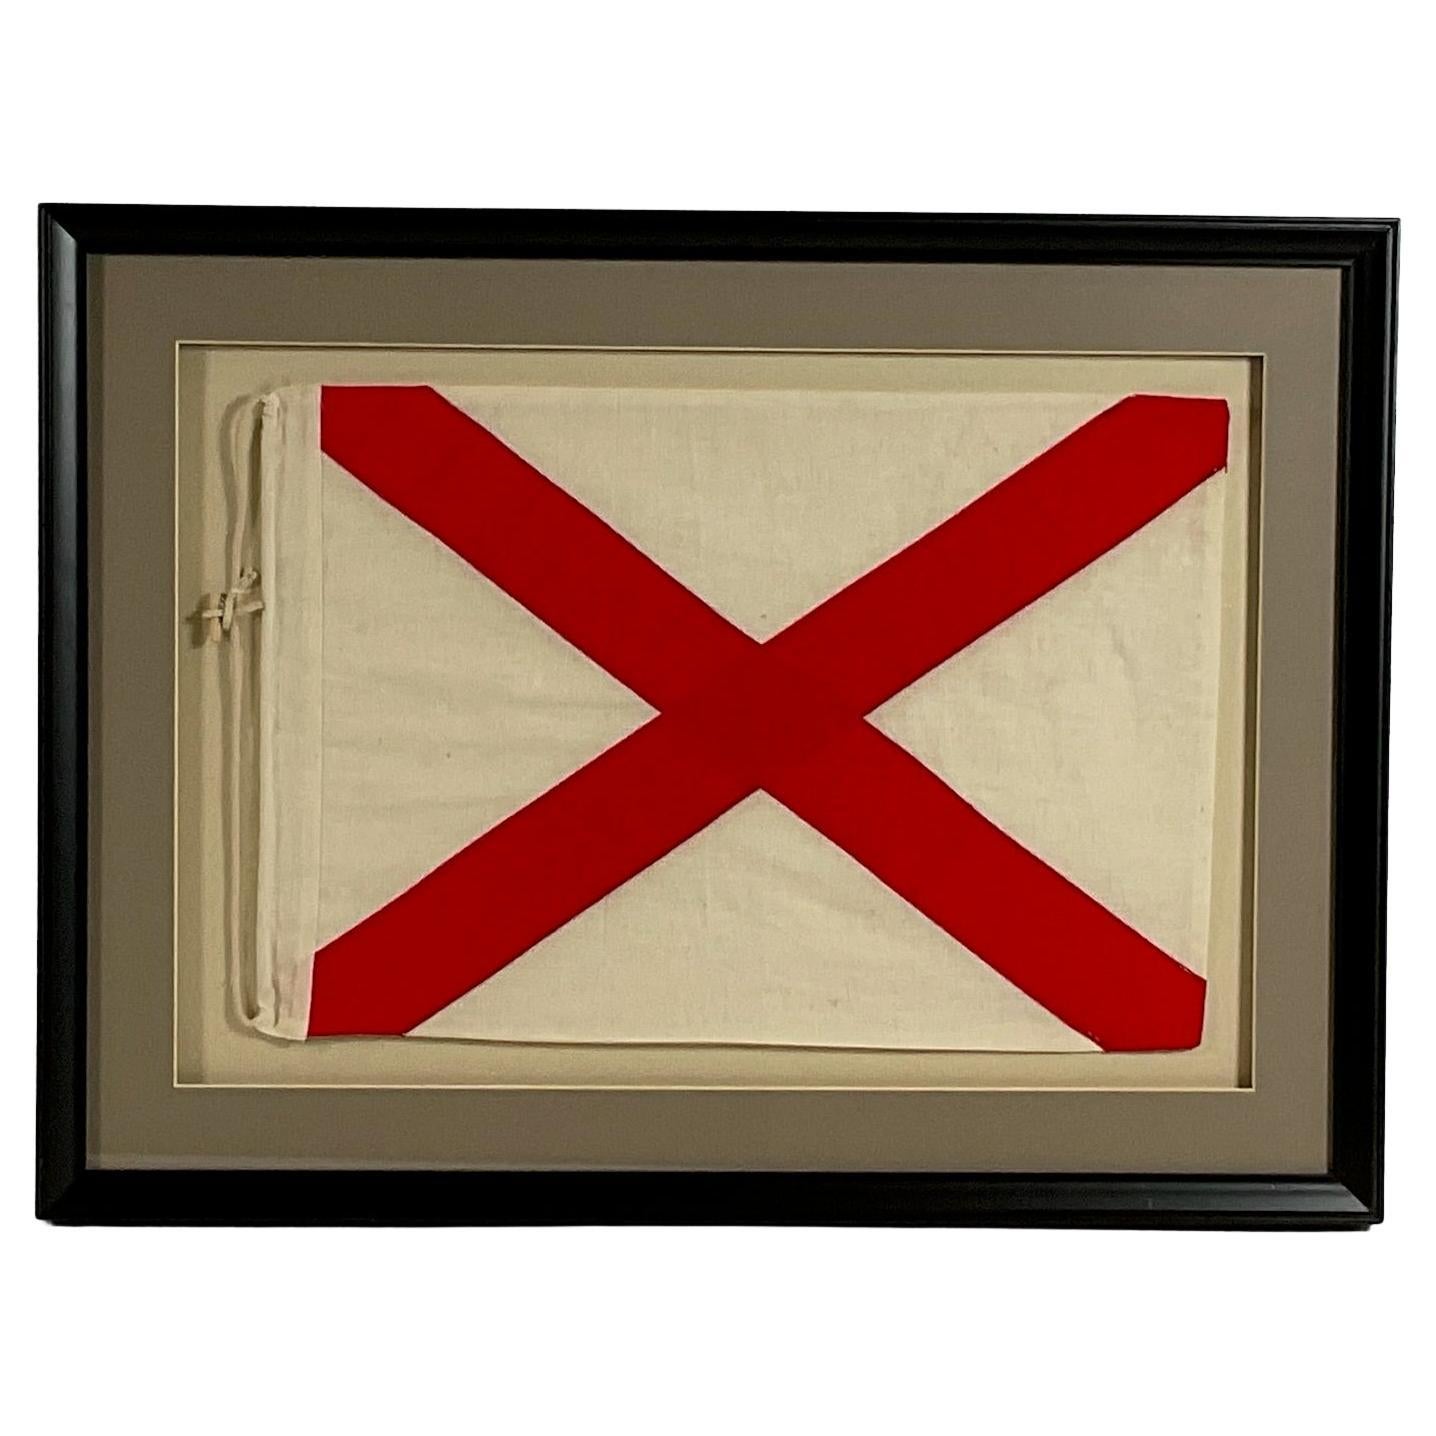 Nautical Signal Flag with Rope and Toggle